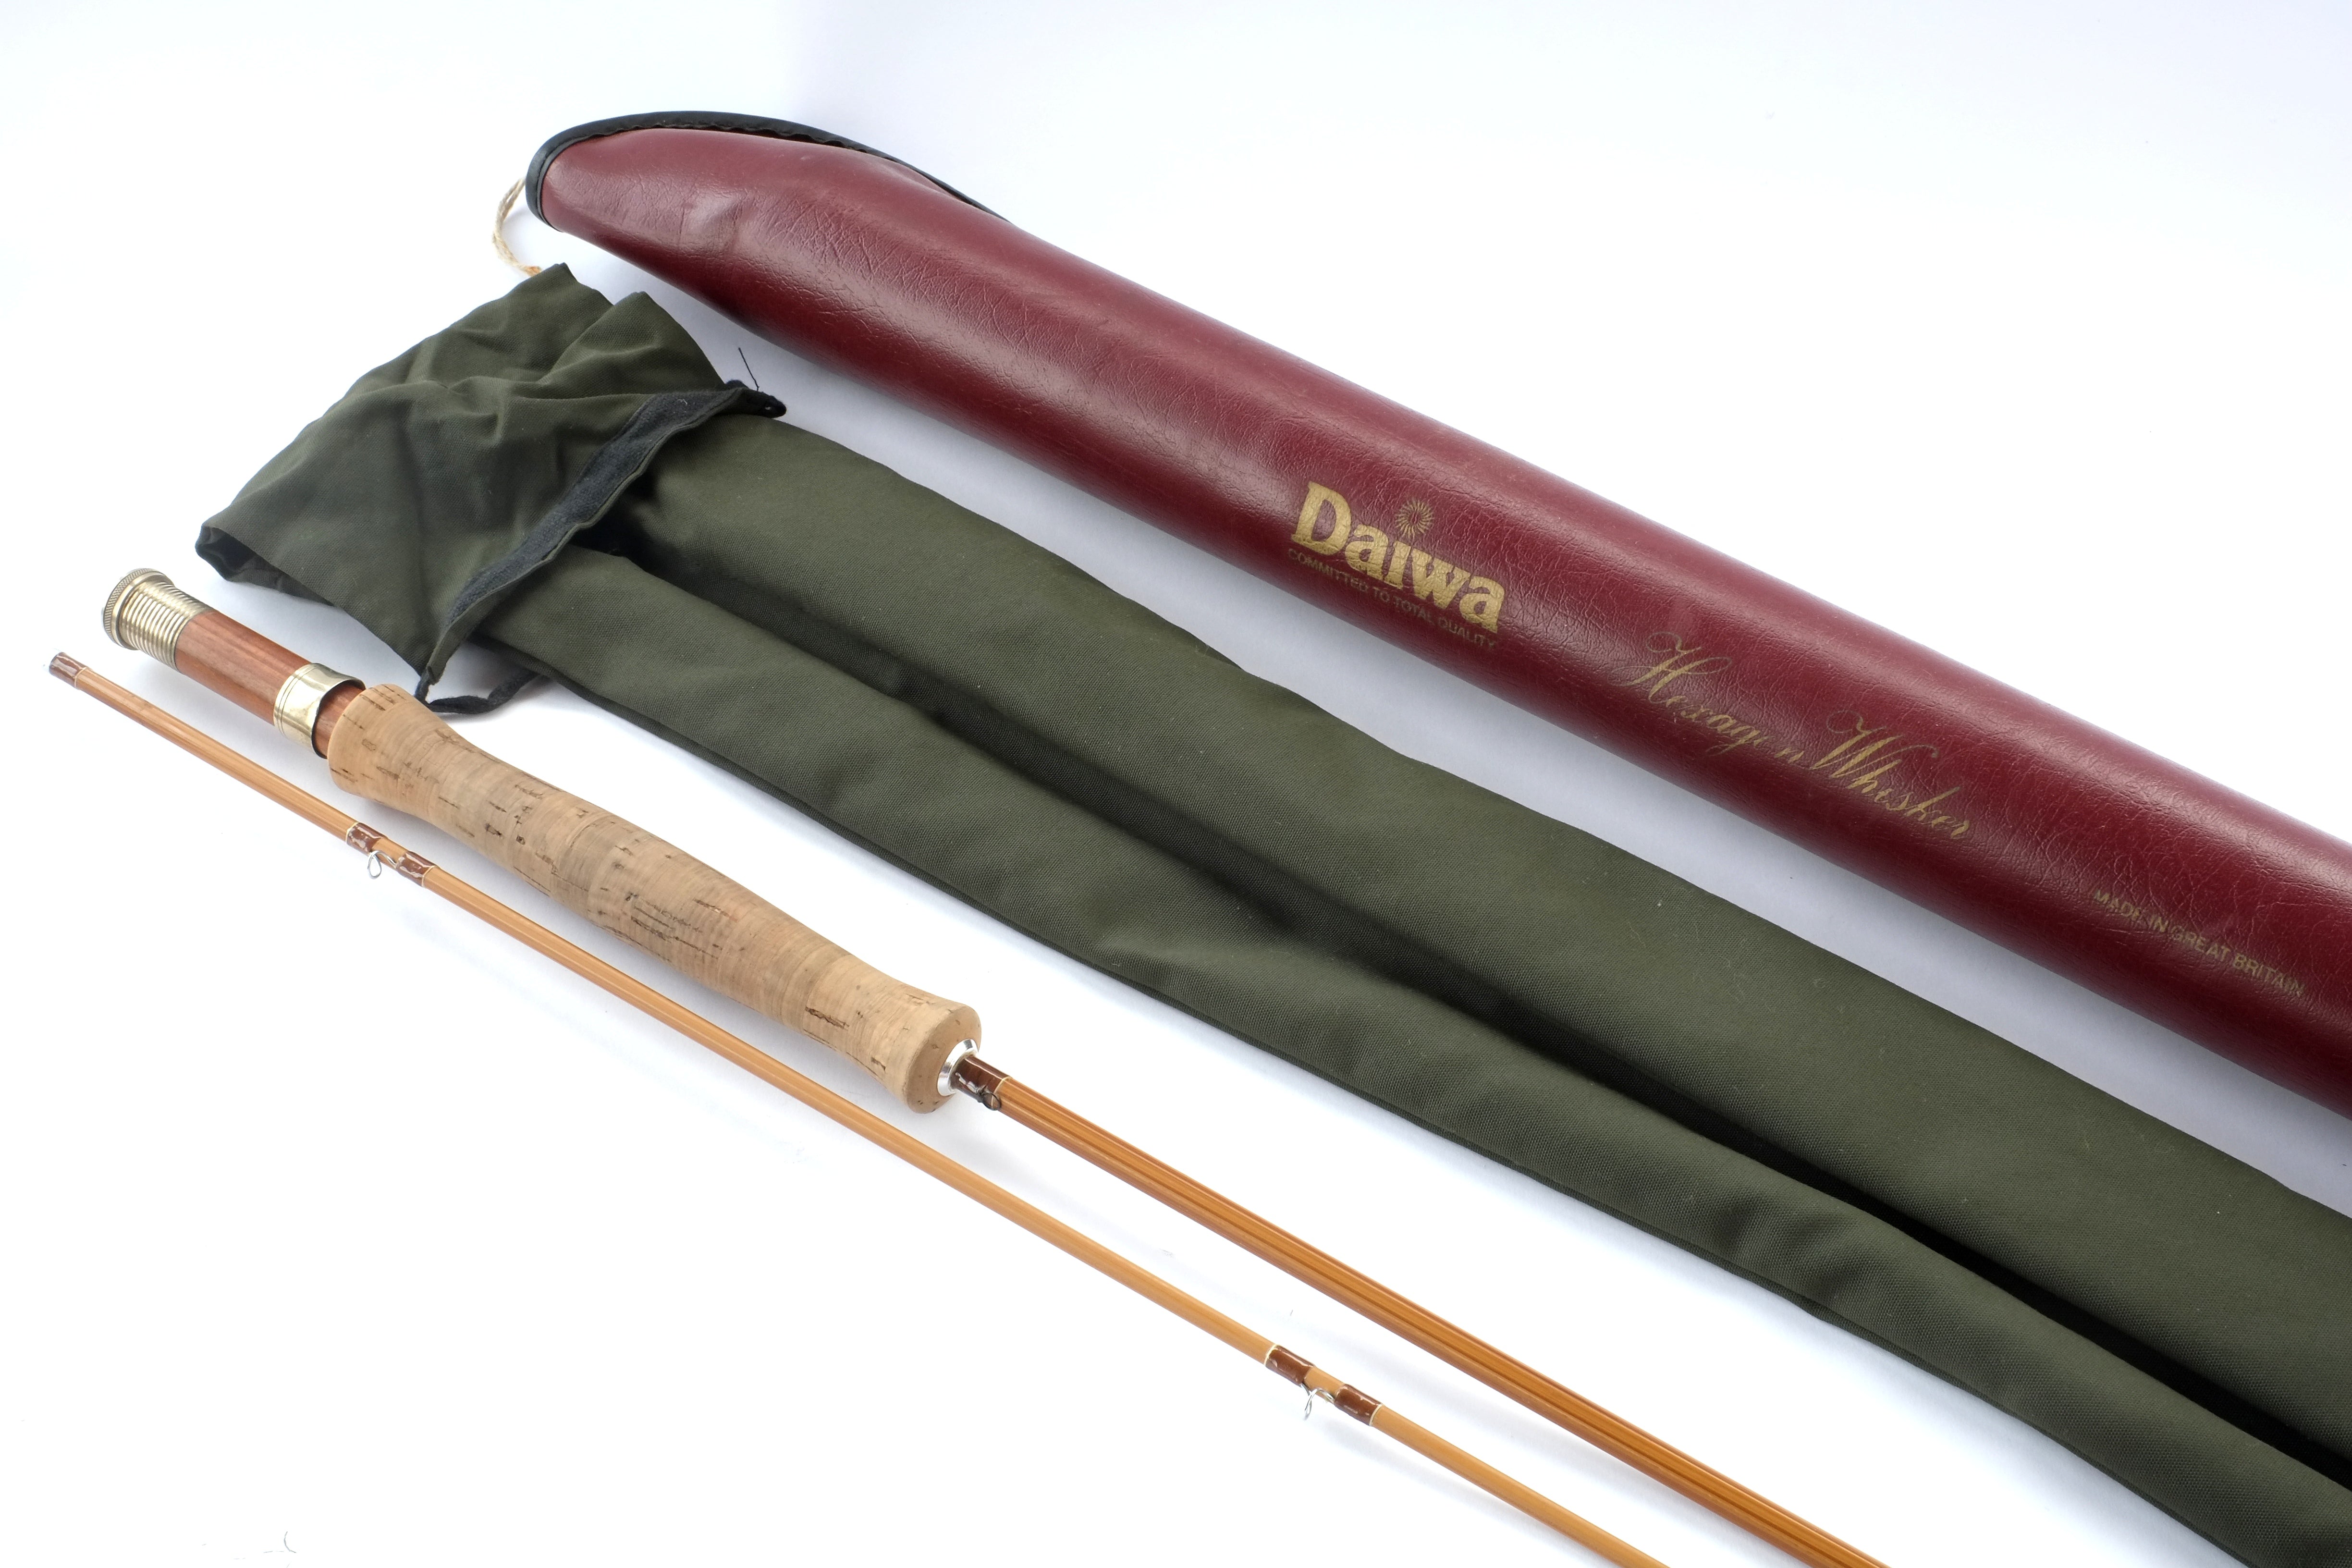 DAIWA WHISKER 10' #6-8 TROUT FLY ROD